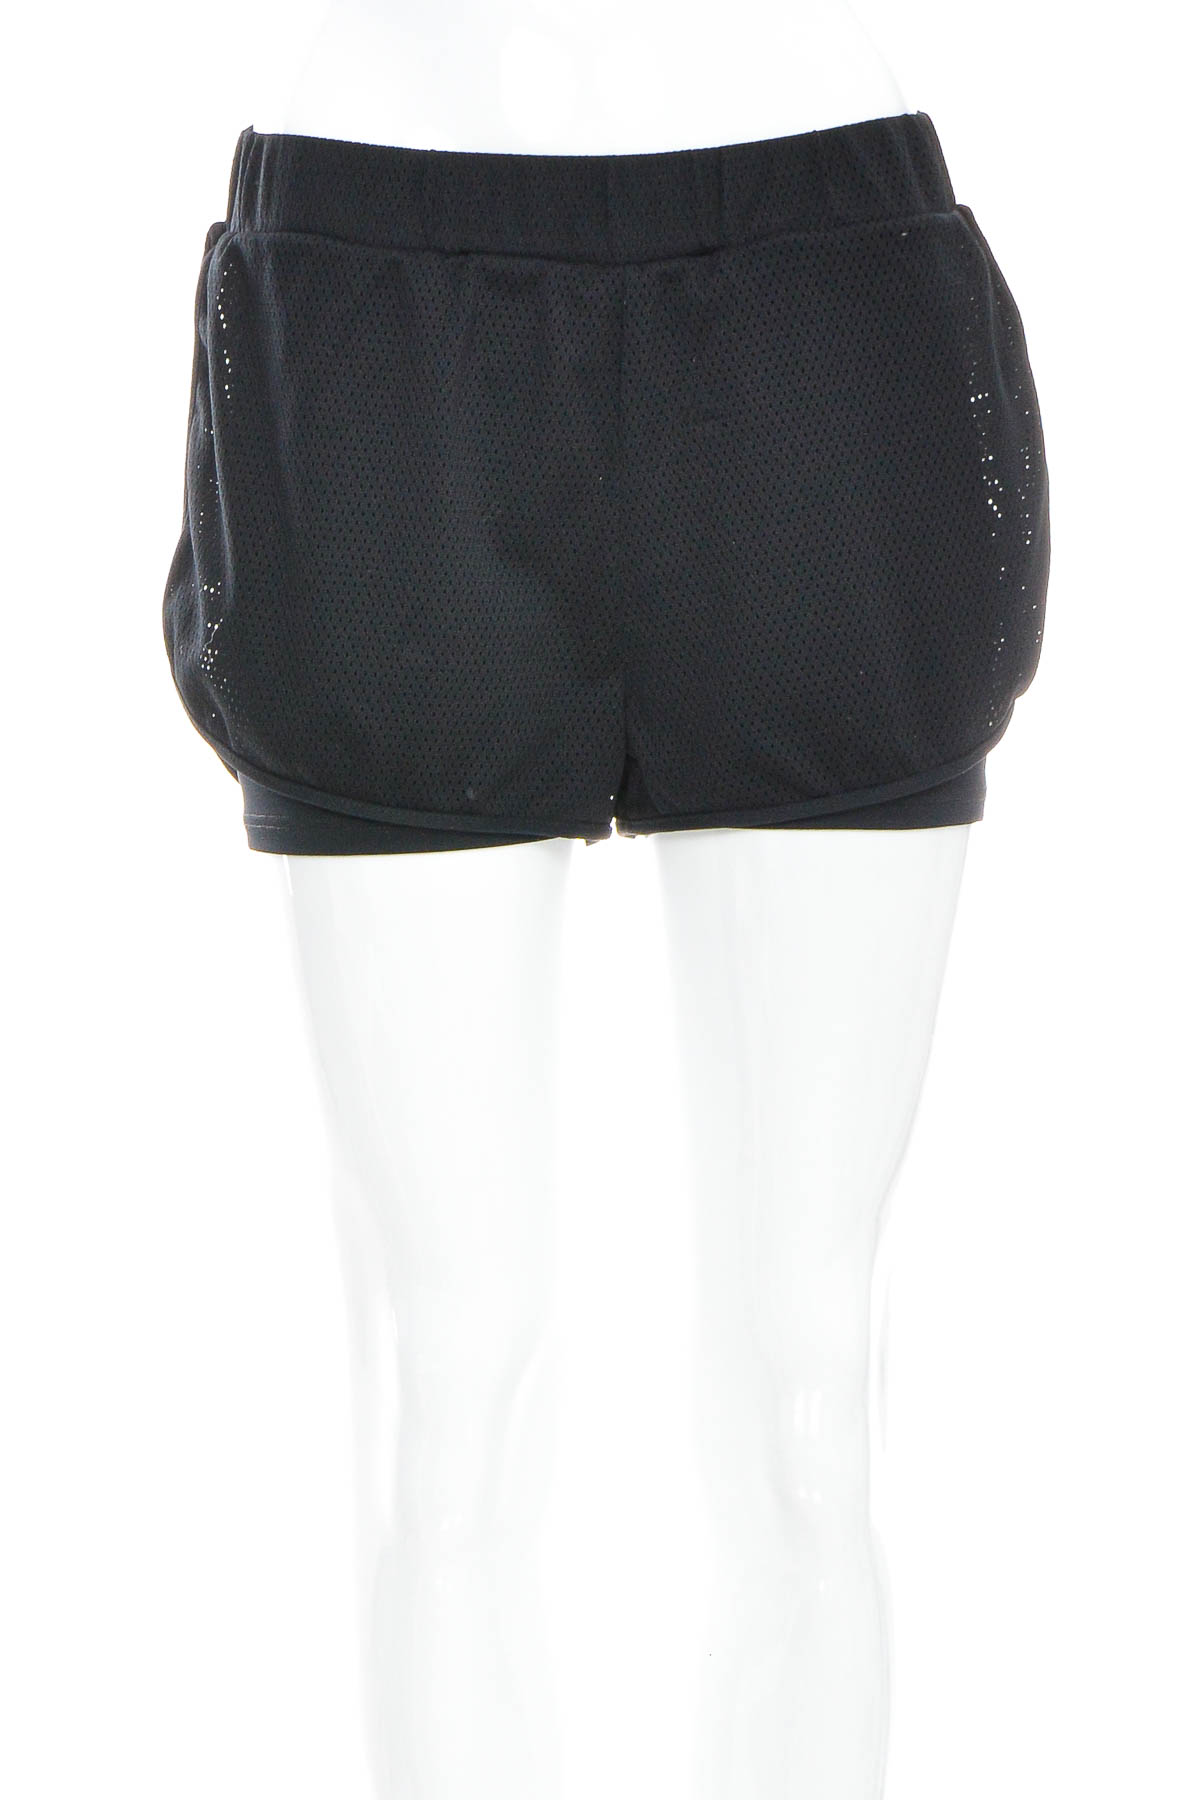 Women's shorts - Russell Athletic - 0